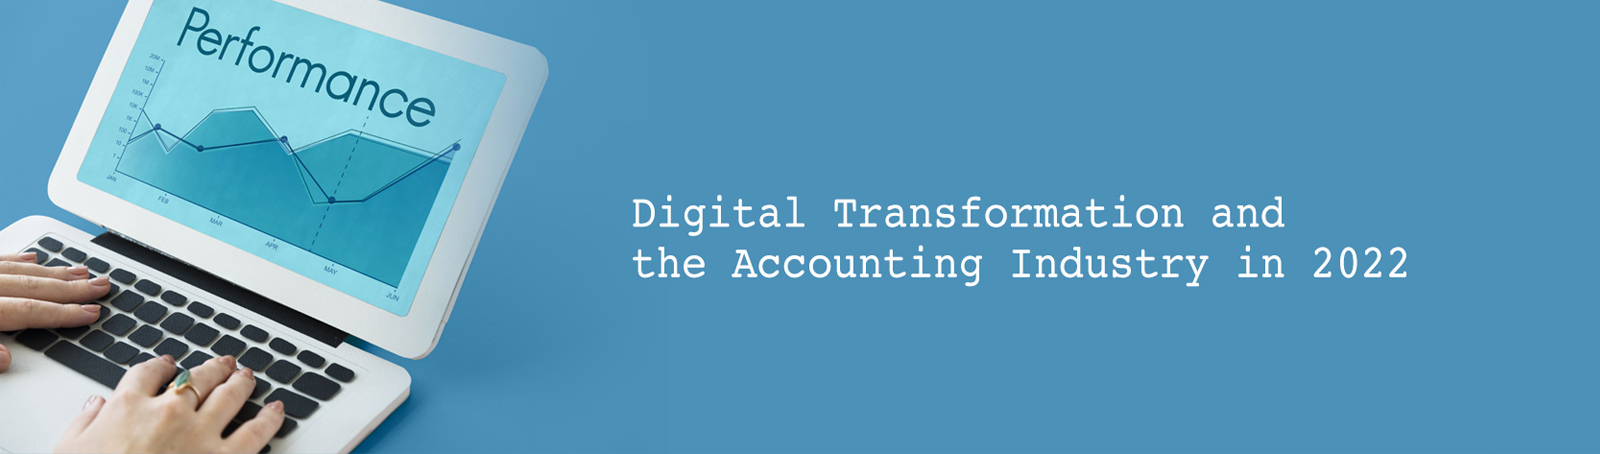 Digital Transformation and the Accounting Industry in 2022 